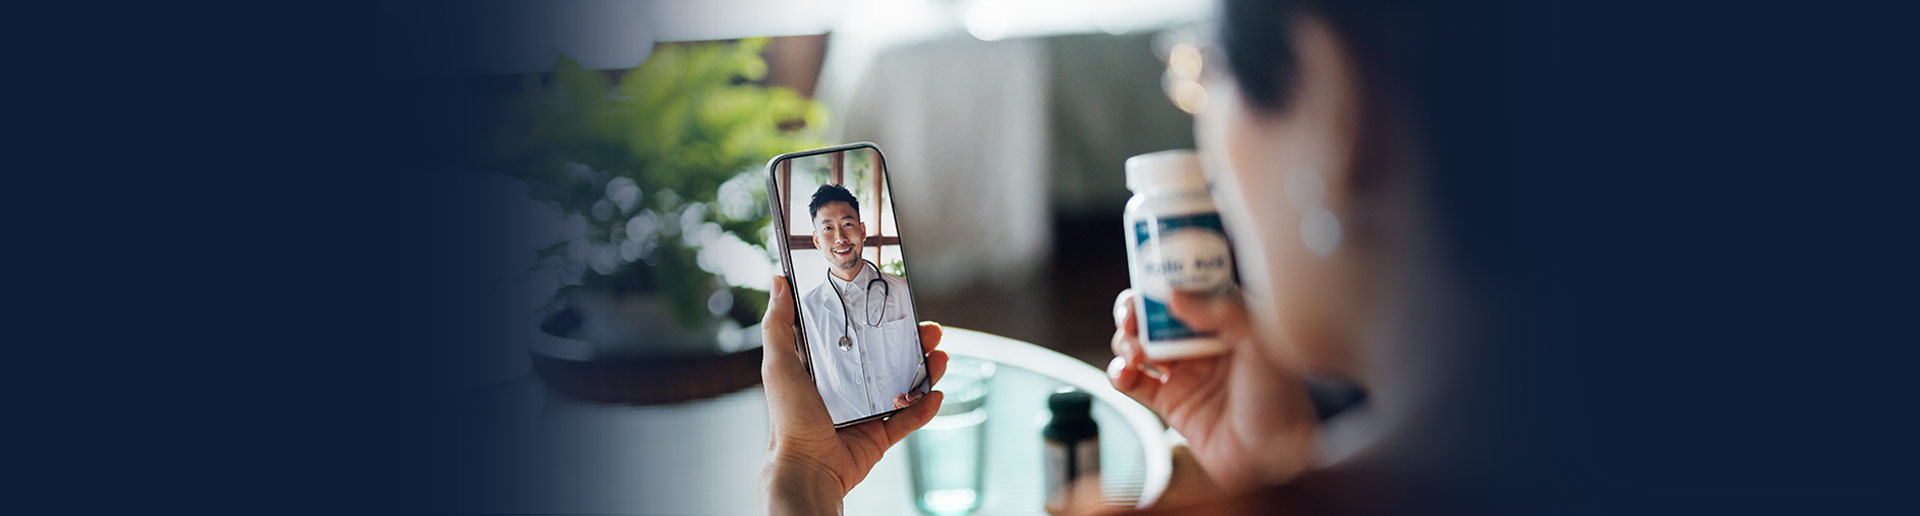 Telehealth Solutions that Increase Patient Satisfaction in Healthcare.